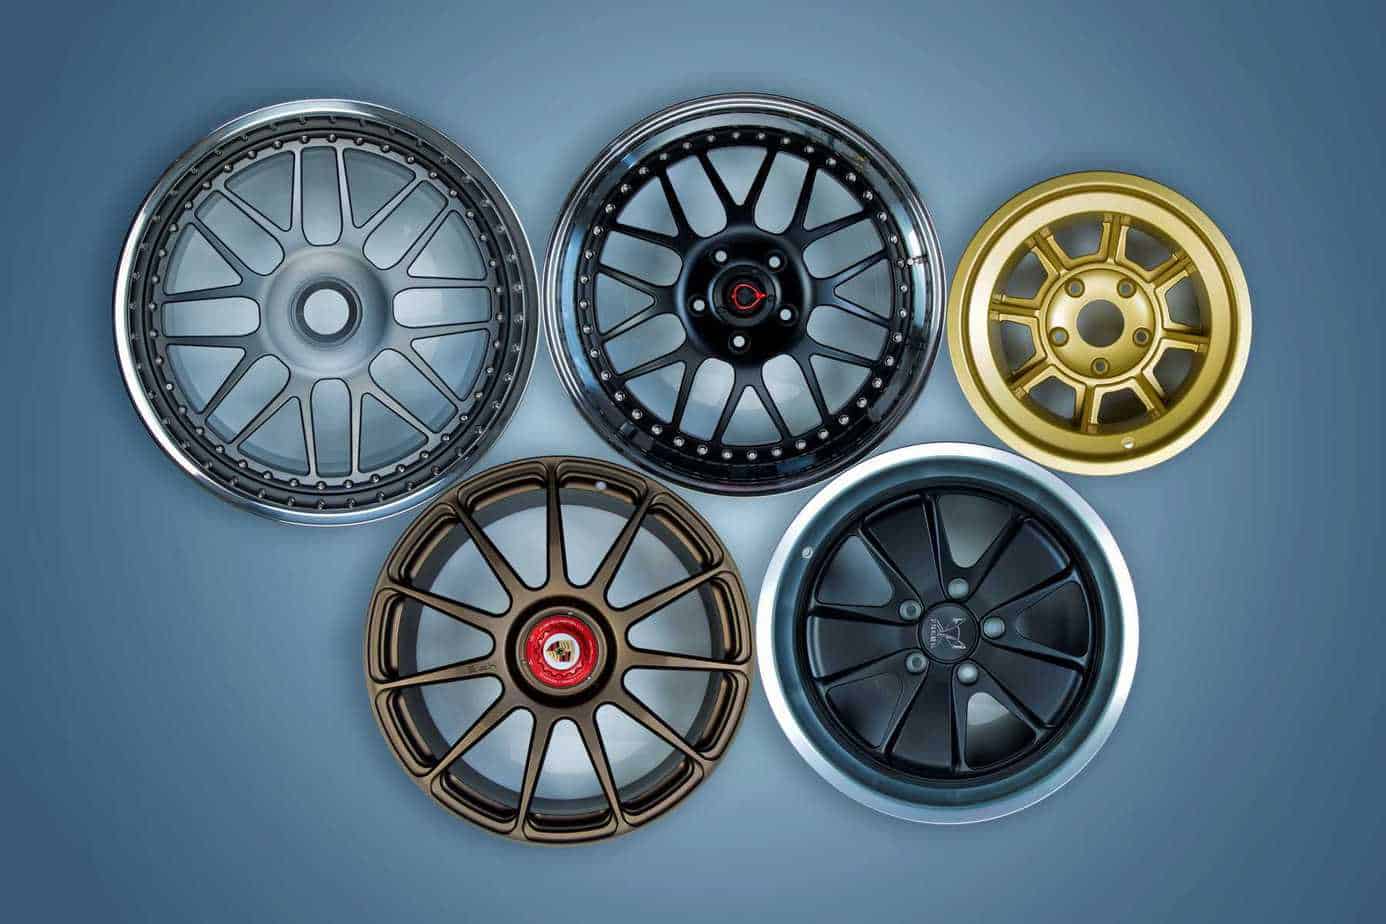 What Are Aftermarket Parts?